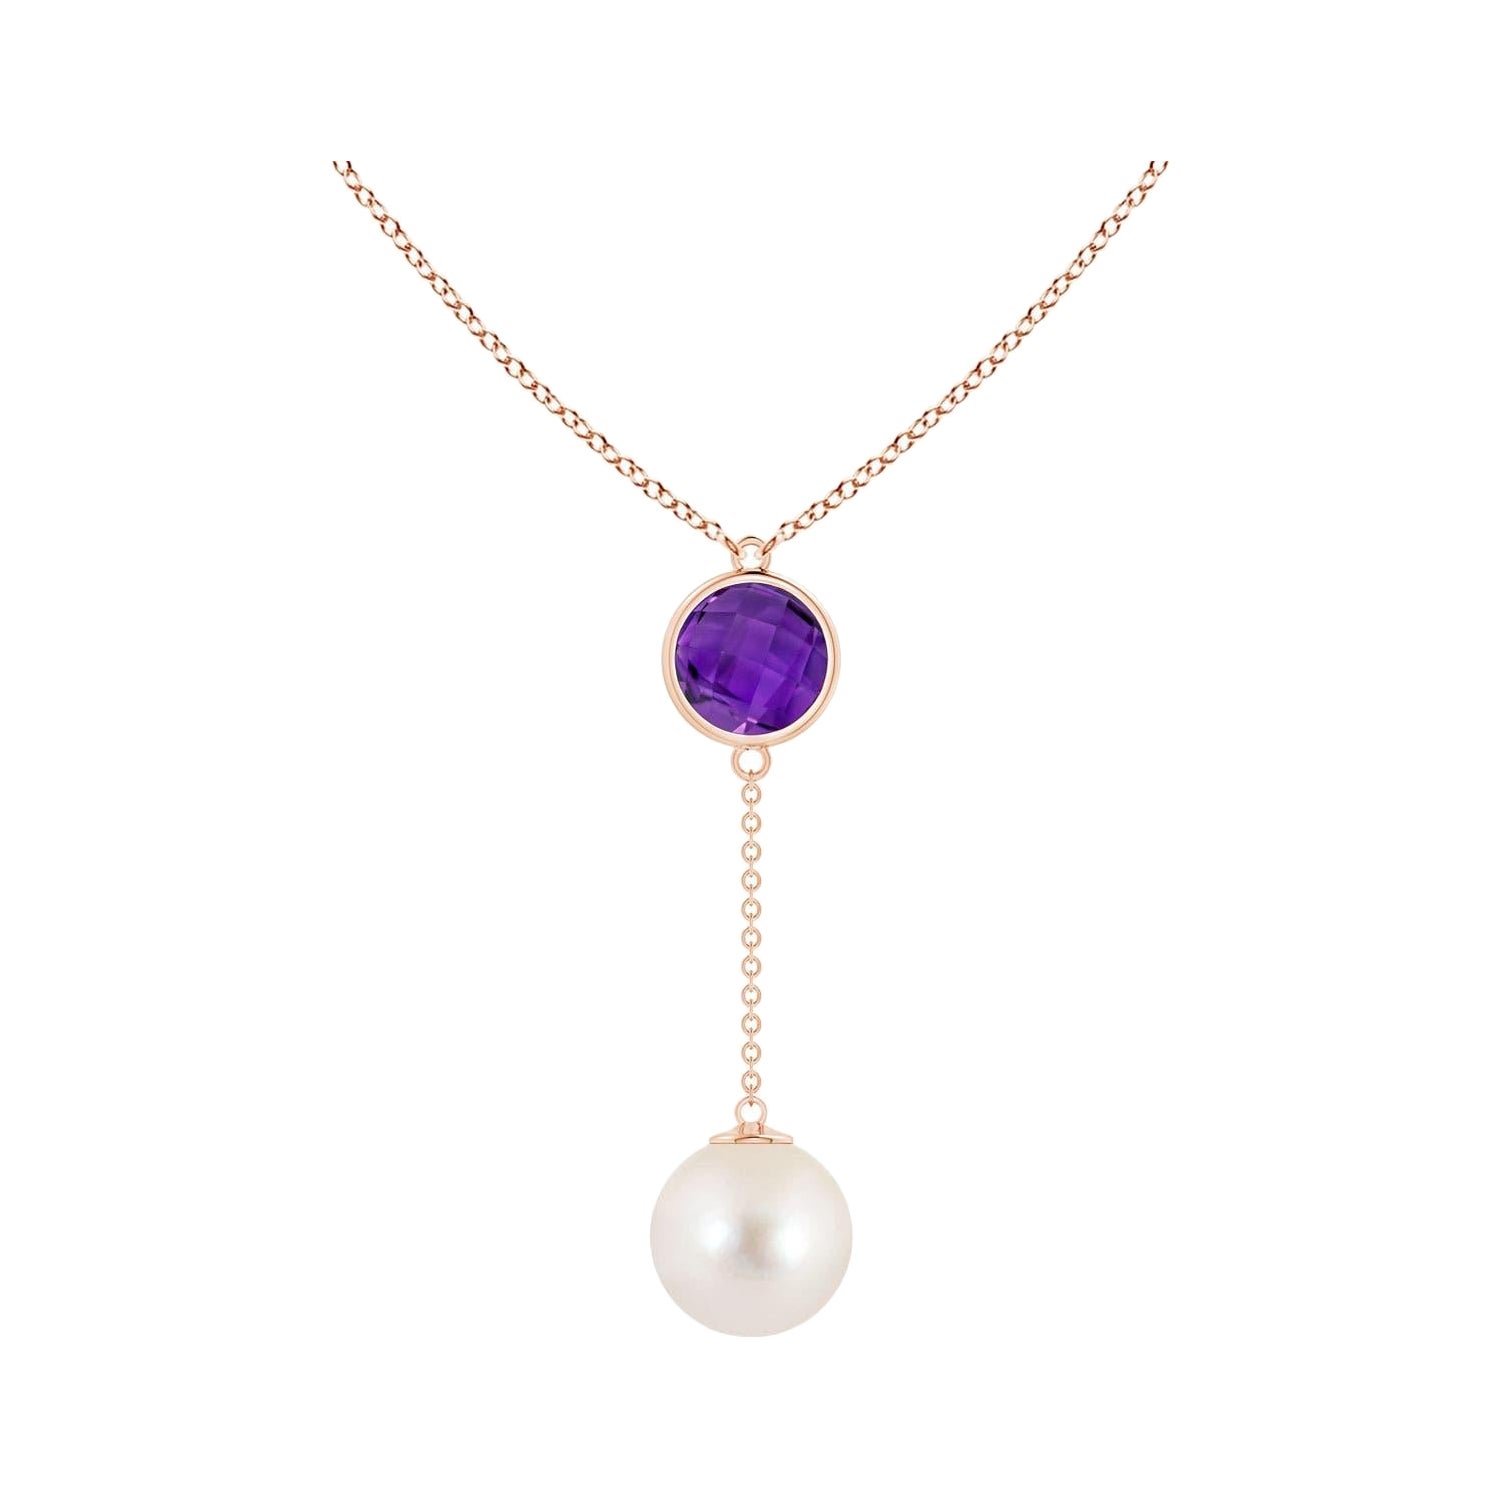 Freshwater Cultured Pearl & 1.65ct Amethyst Lariat Necklace in 14K Rose Gold For Sale